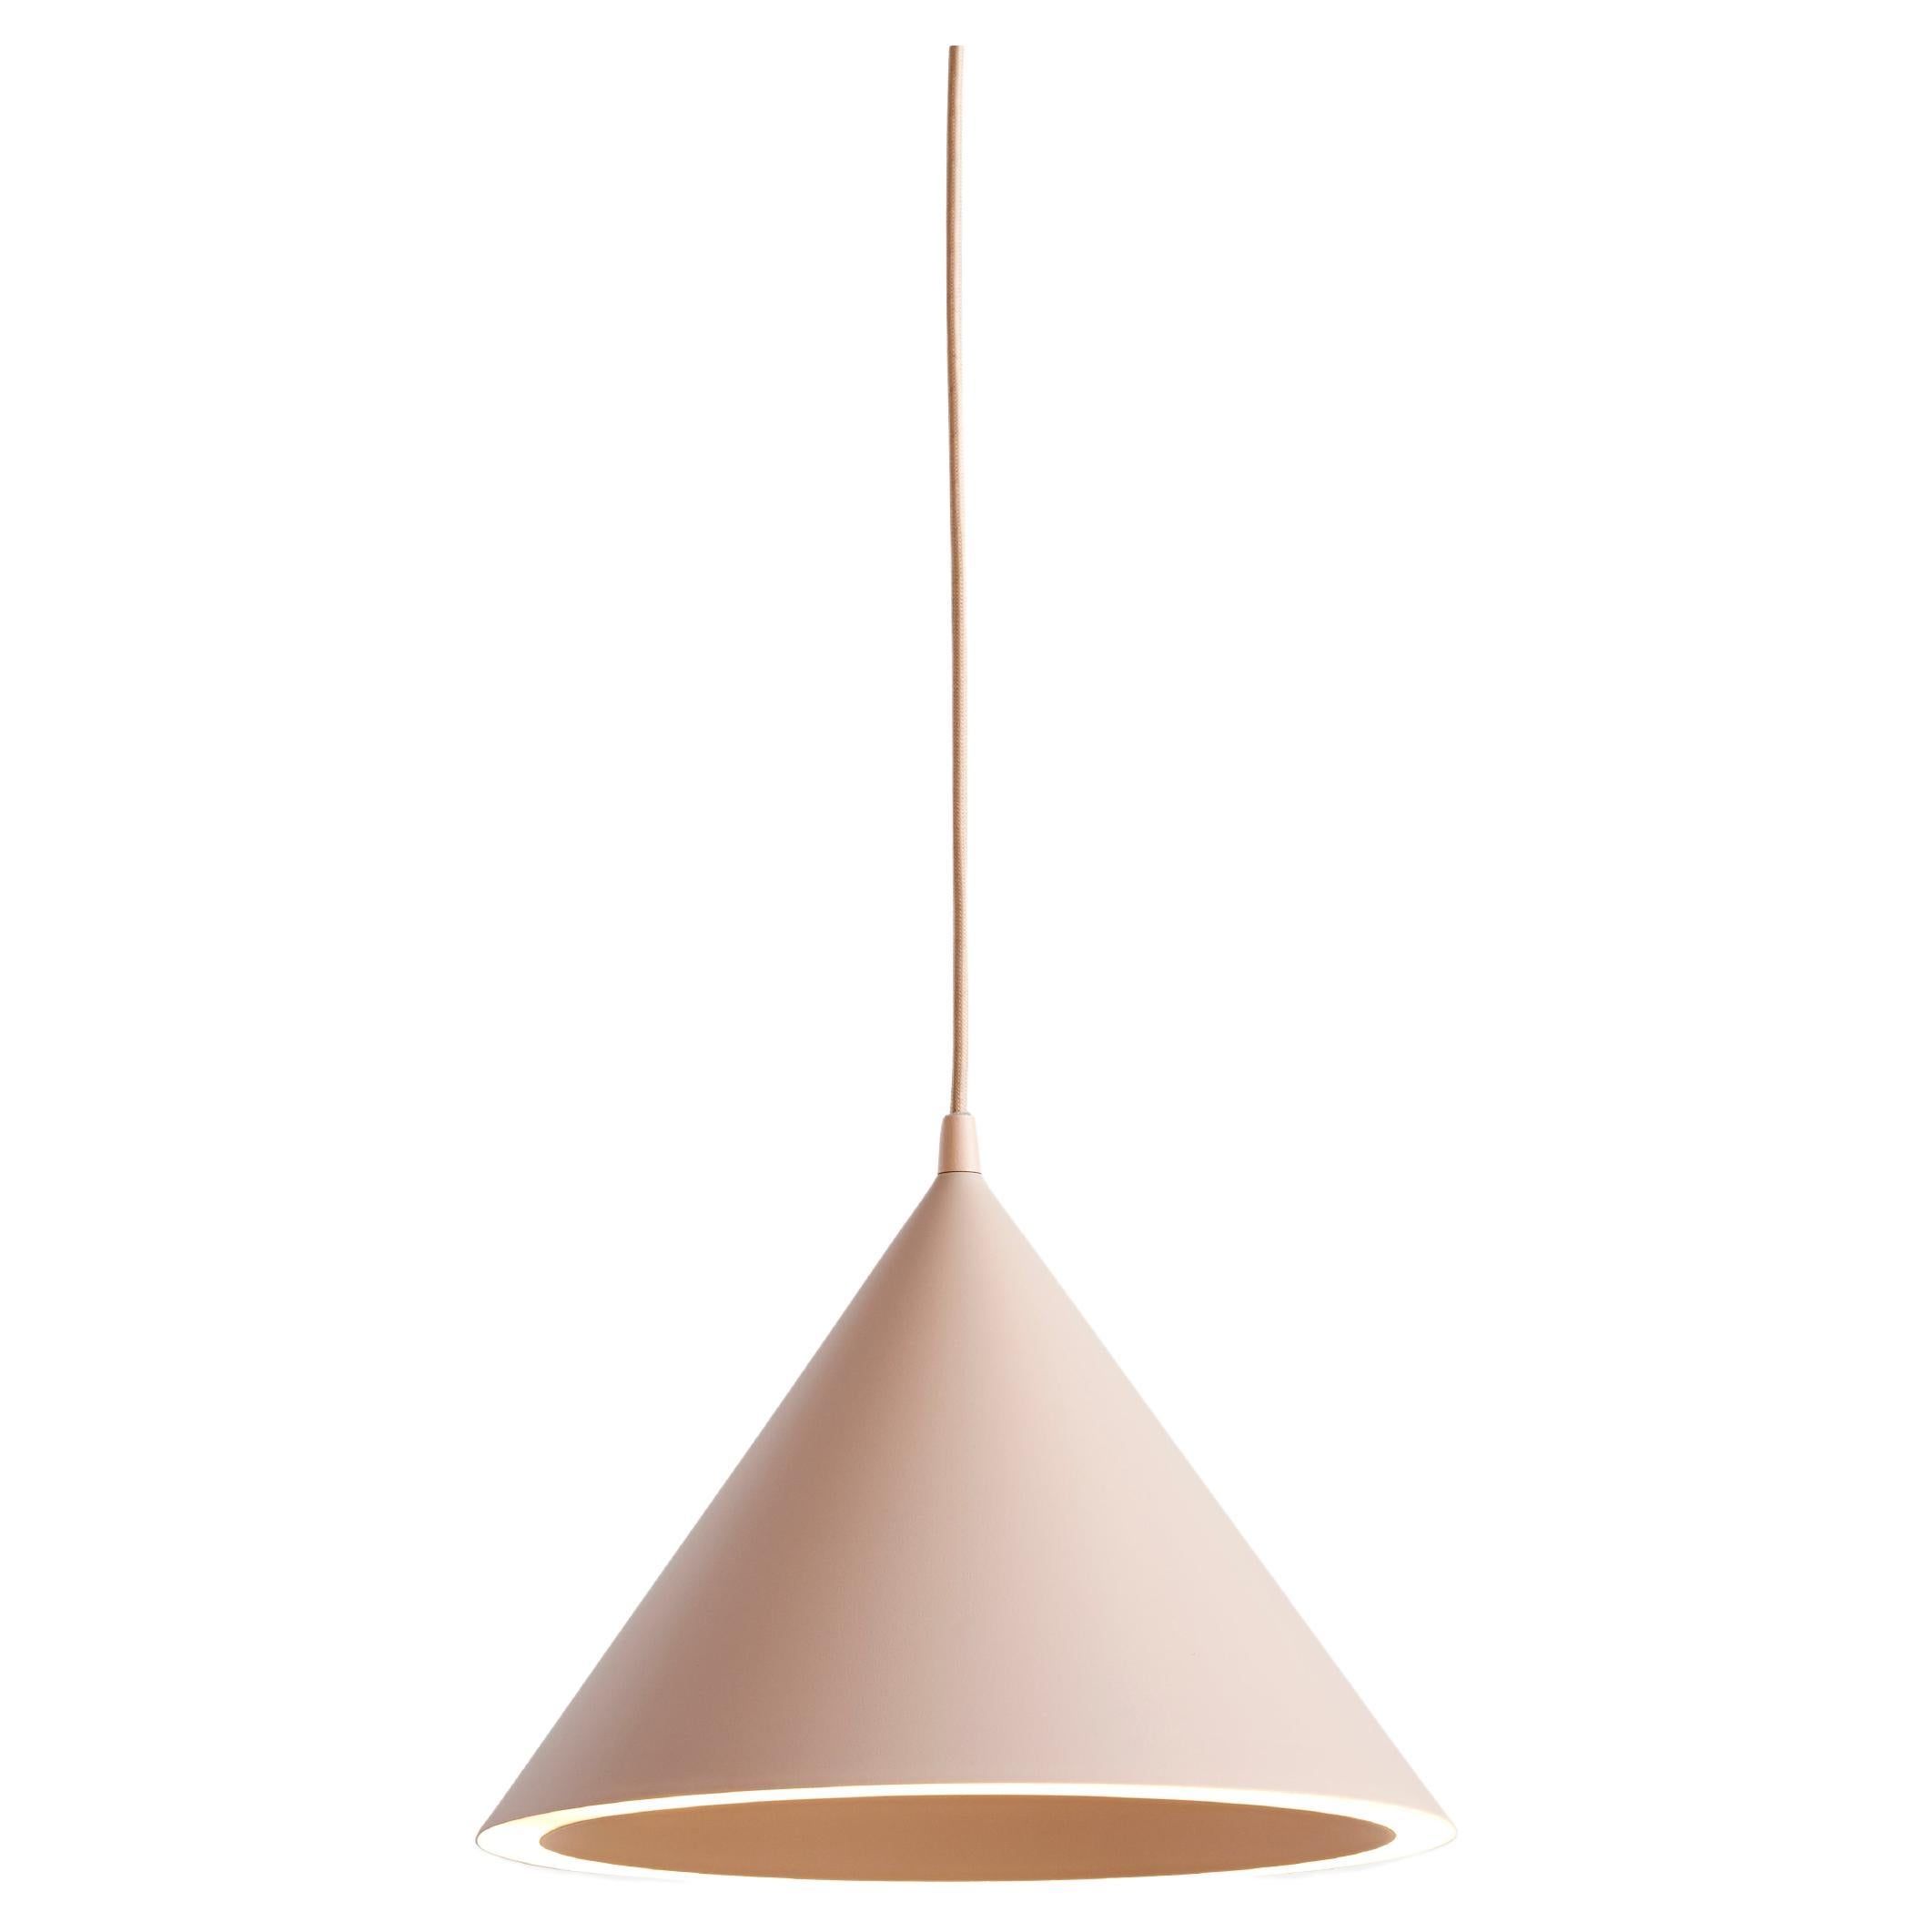 Small Nude Annular Pendant Lamp by MSDS Studio For Sale